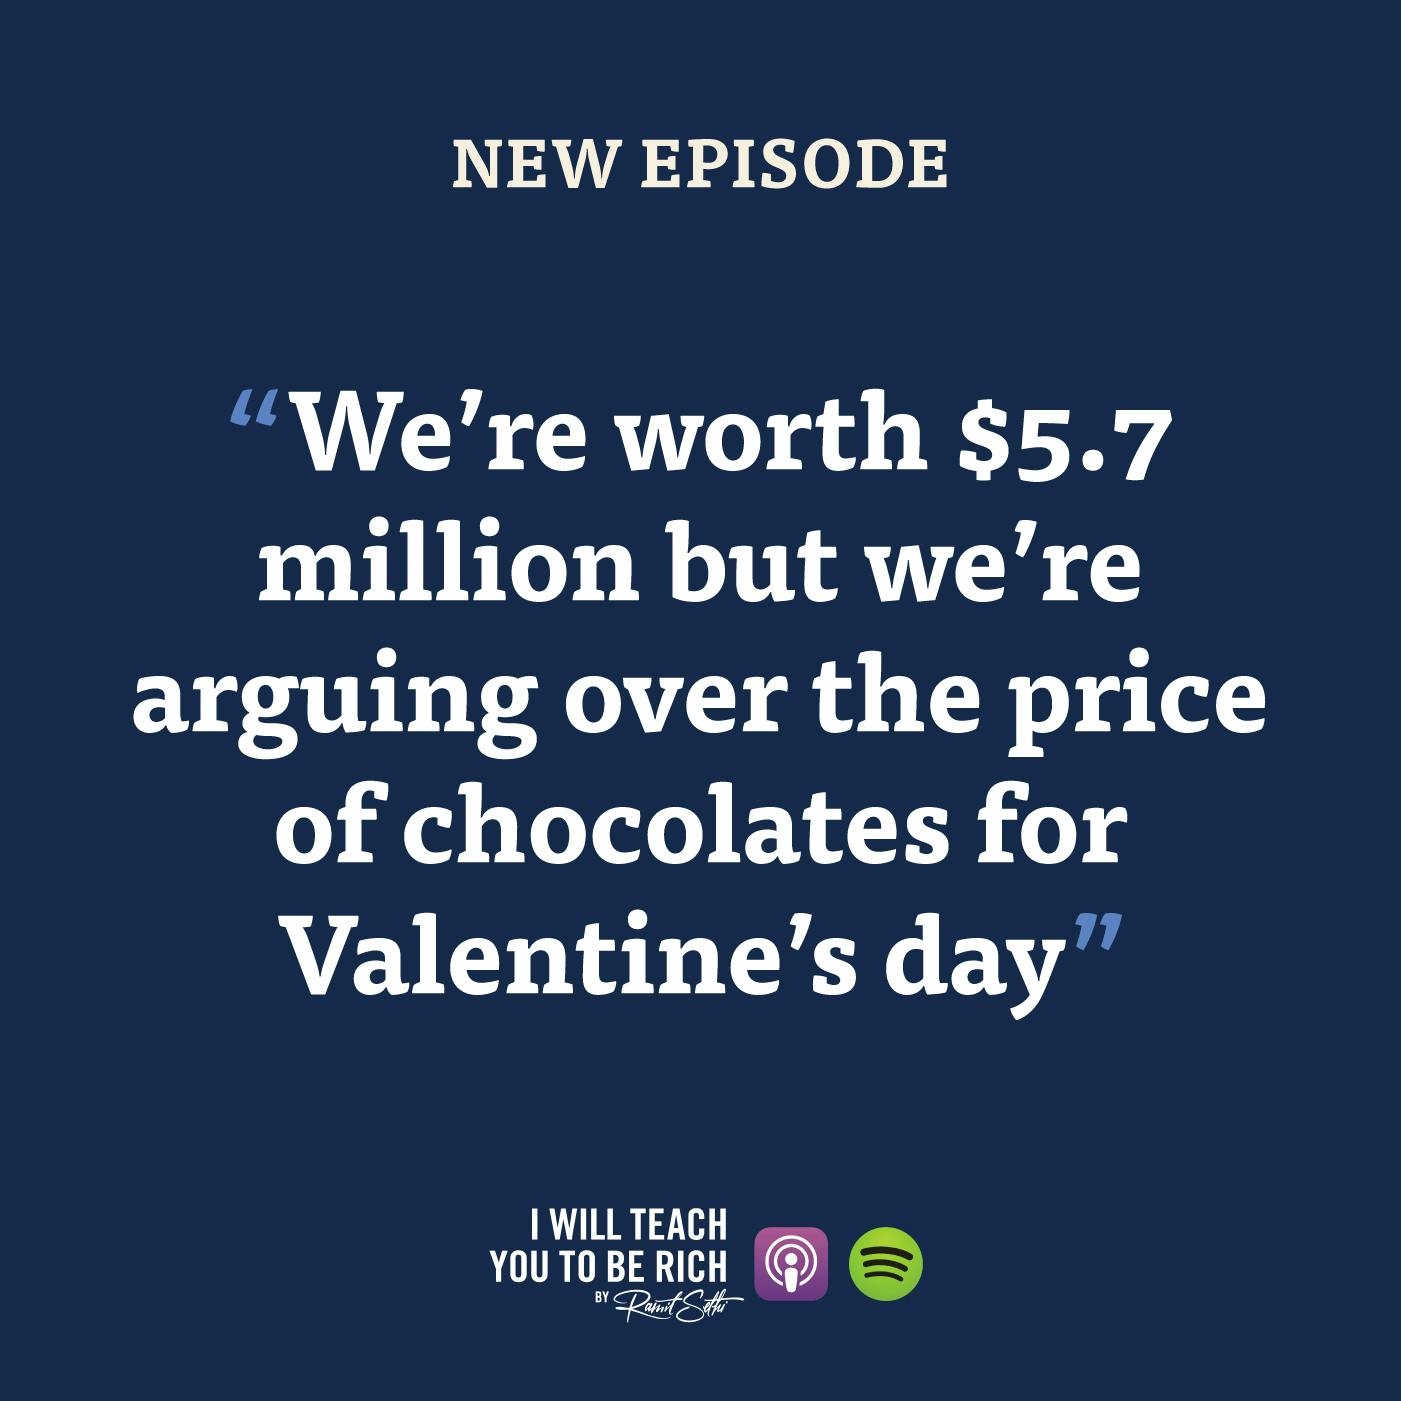 42. “We’re worth $5.7 million but we’re arguing over the price of chocolates for Valentine’s day”